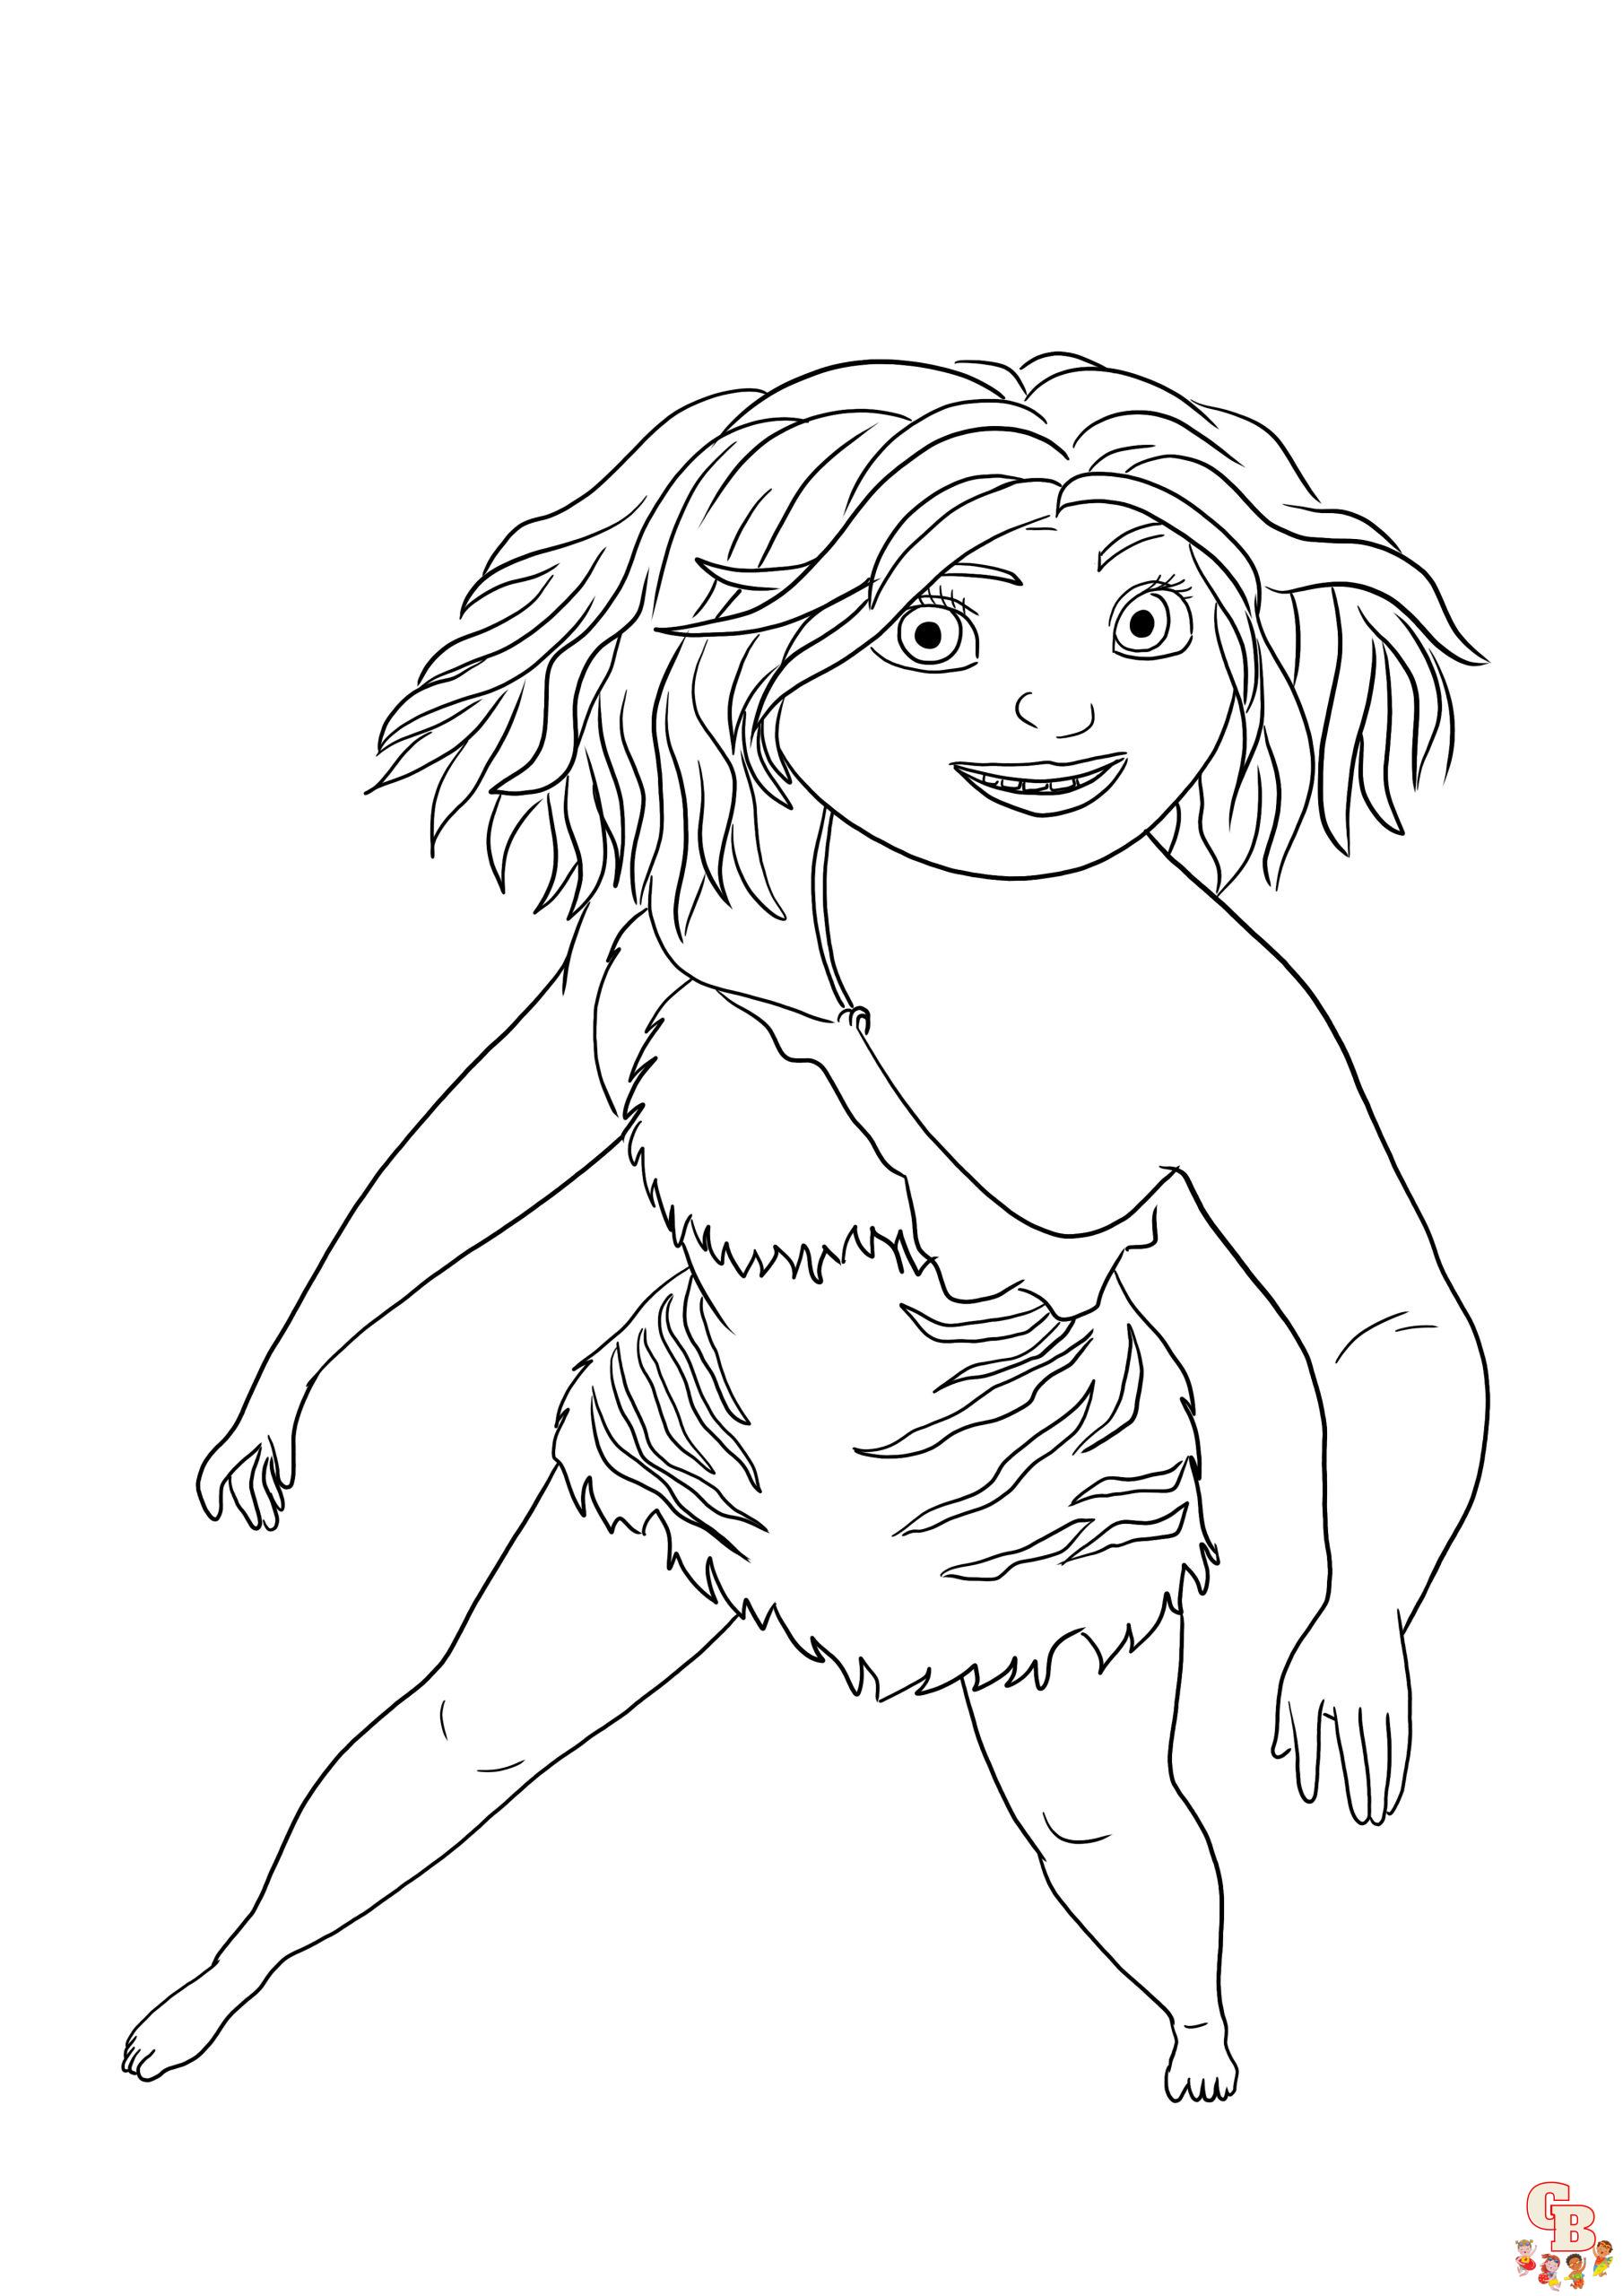 Coloring The Croods